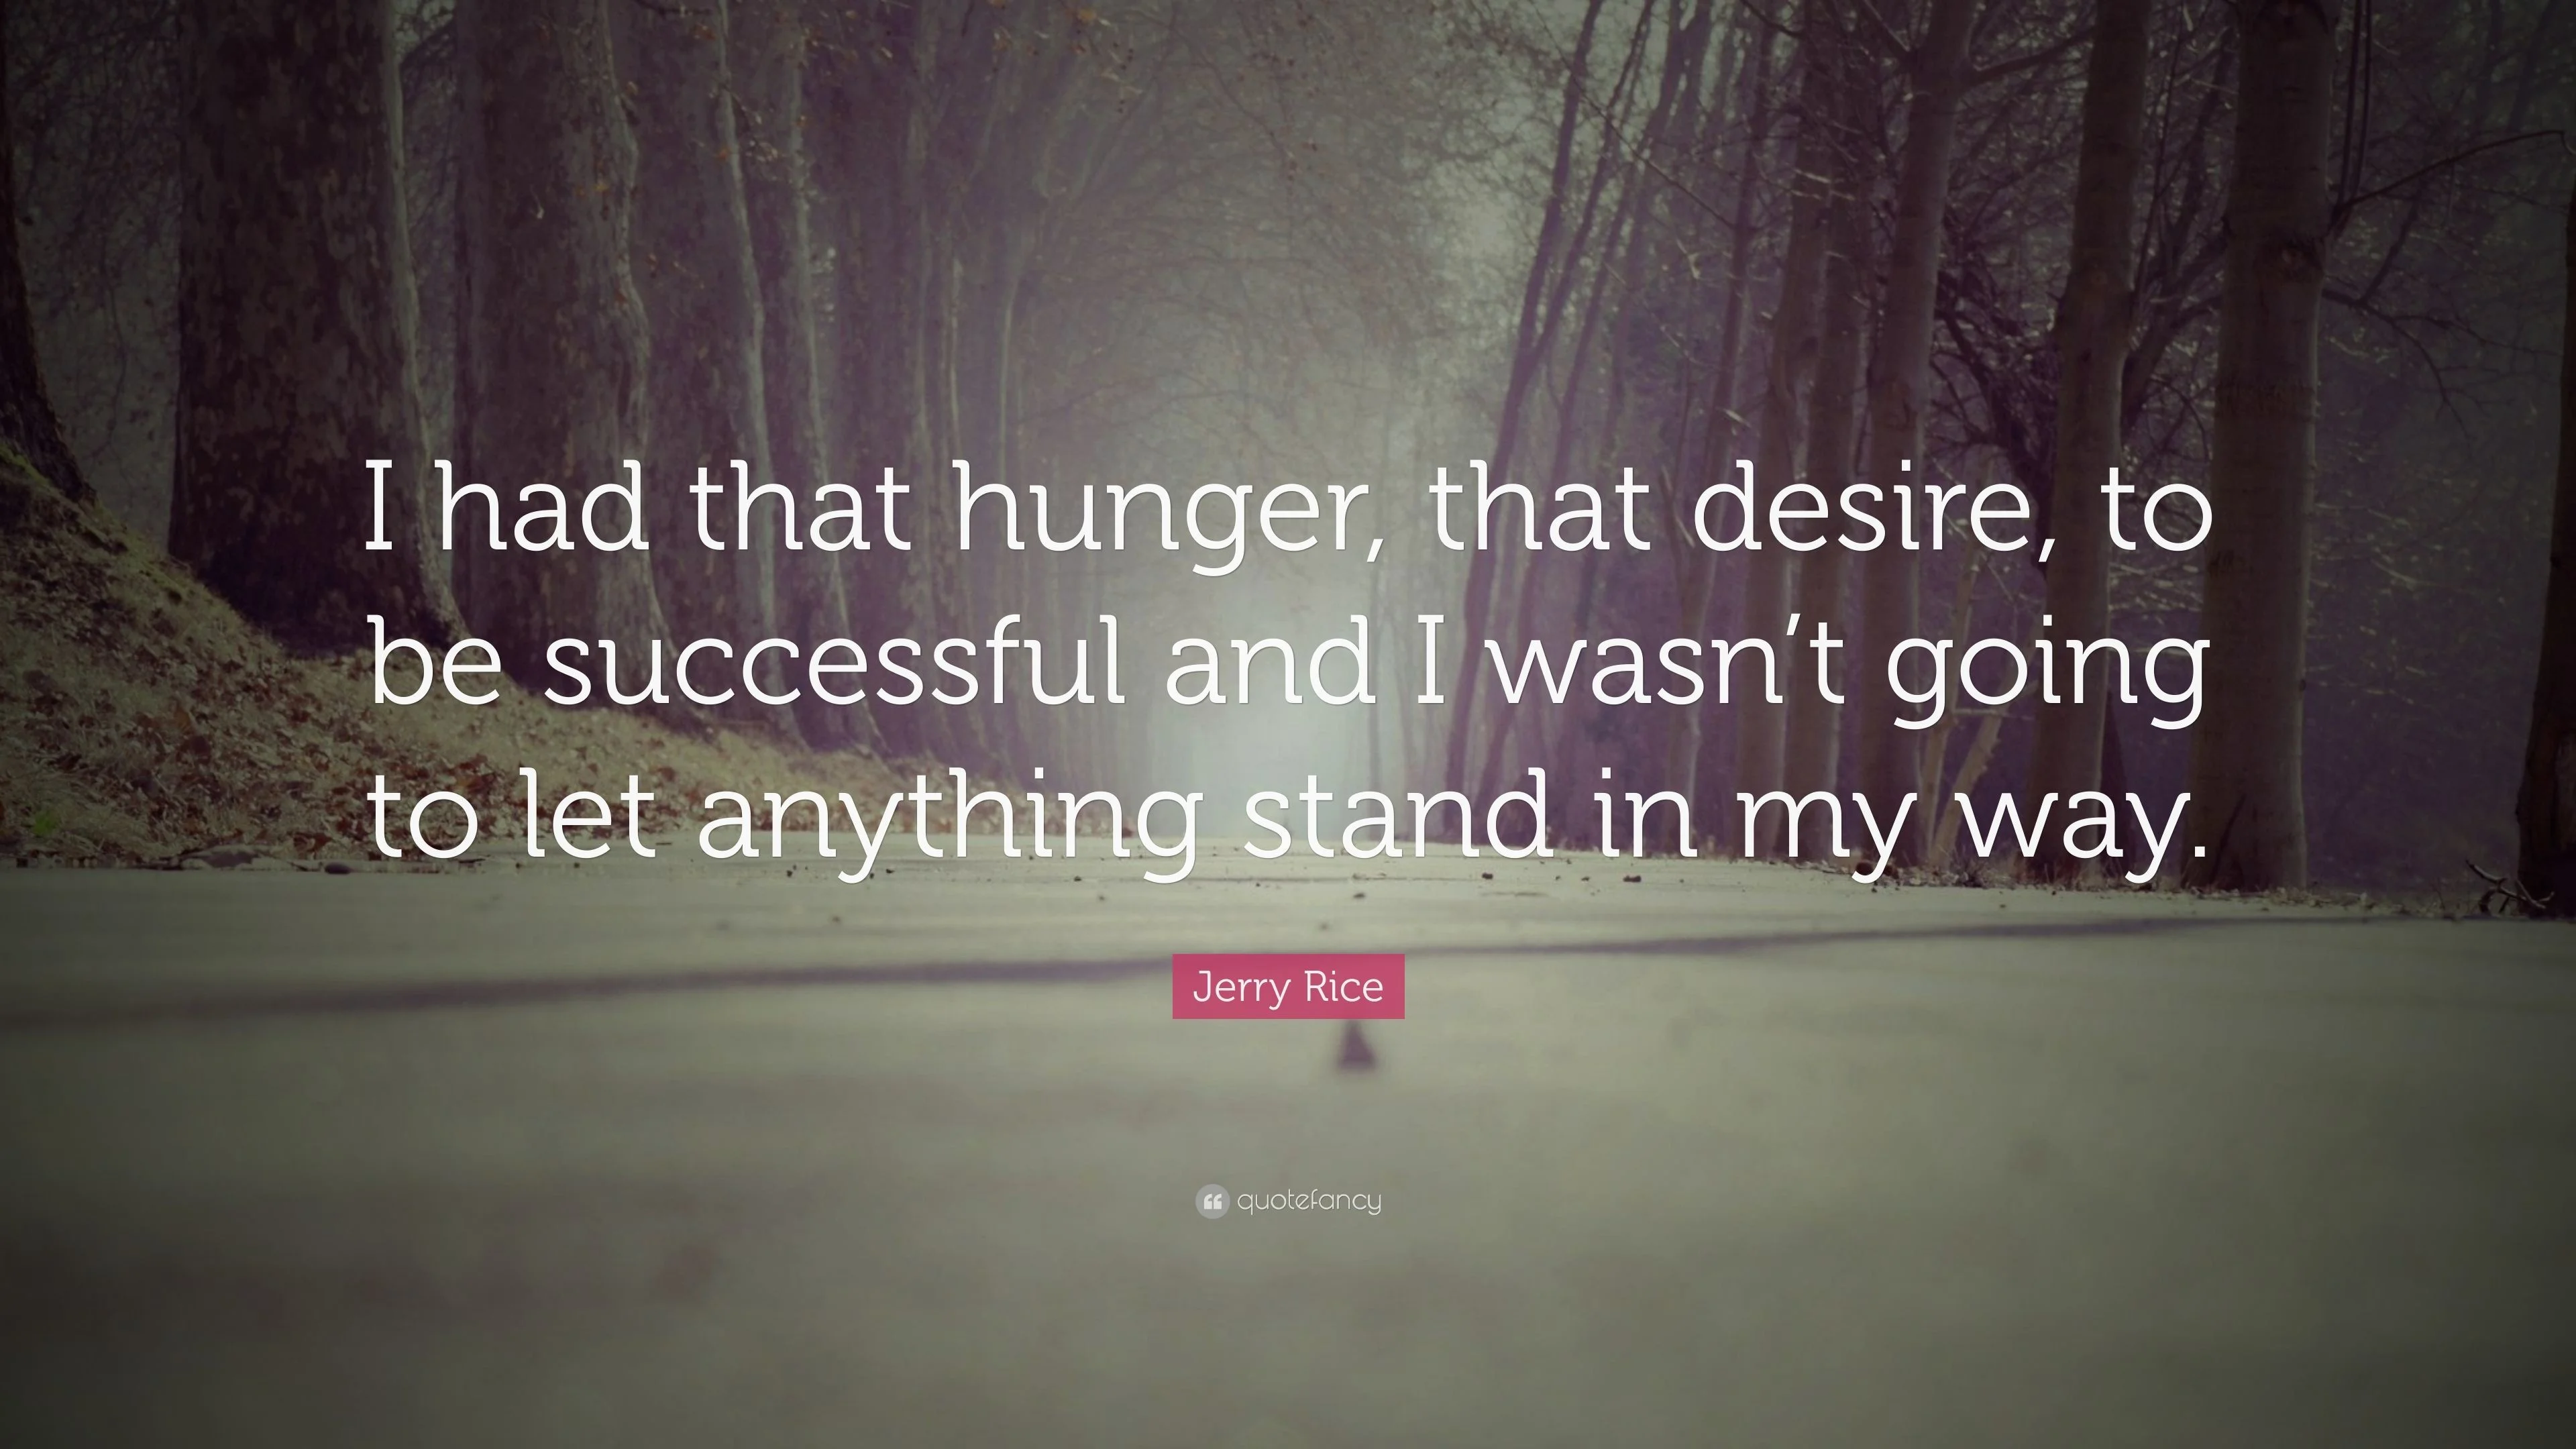 Jerry Rice Quote: “I had that hunger, that desire, to be successful